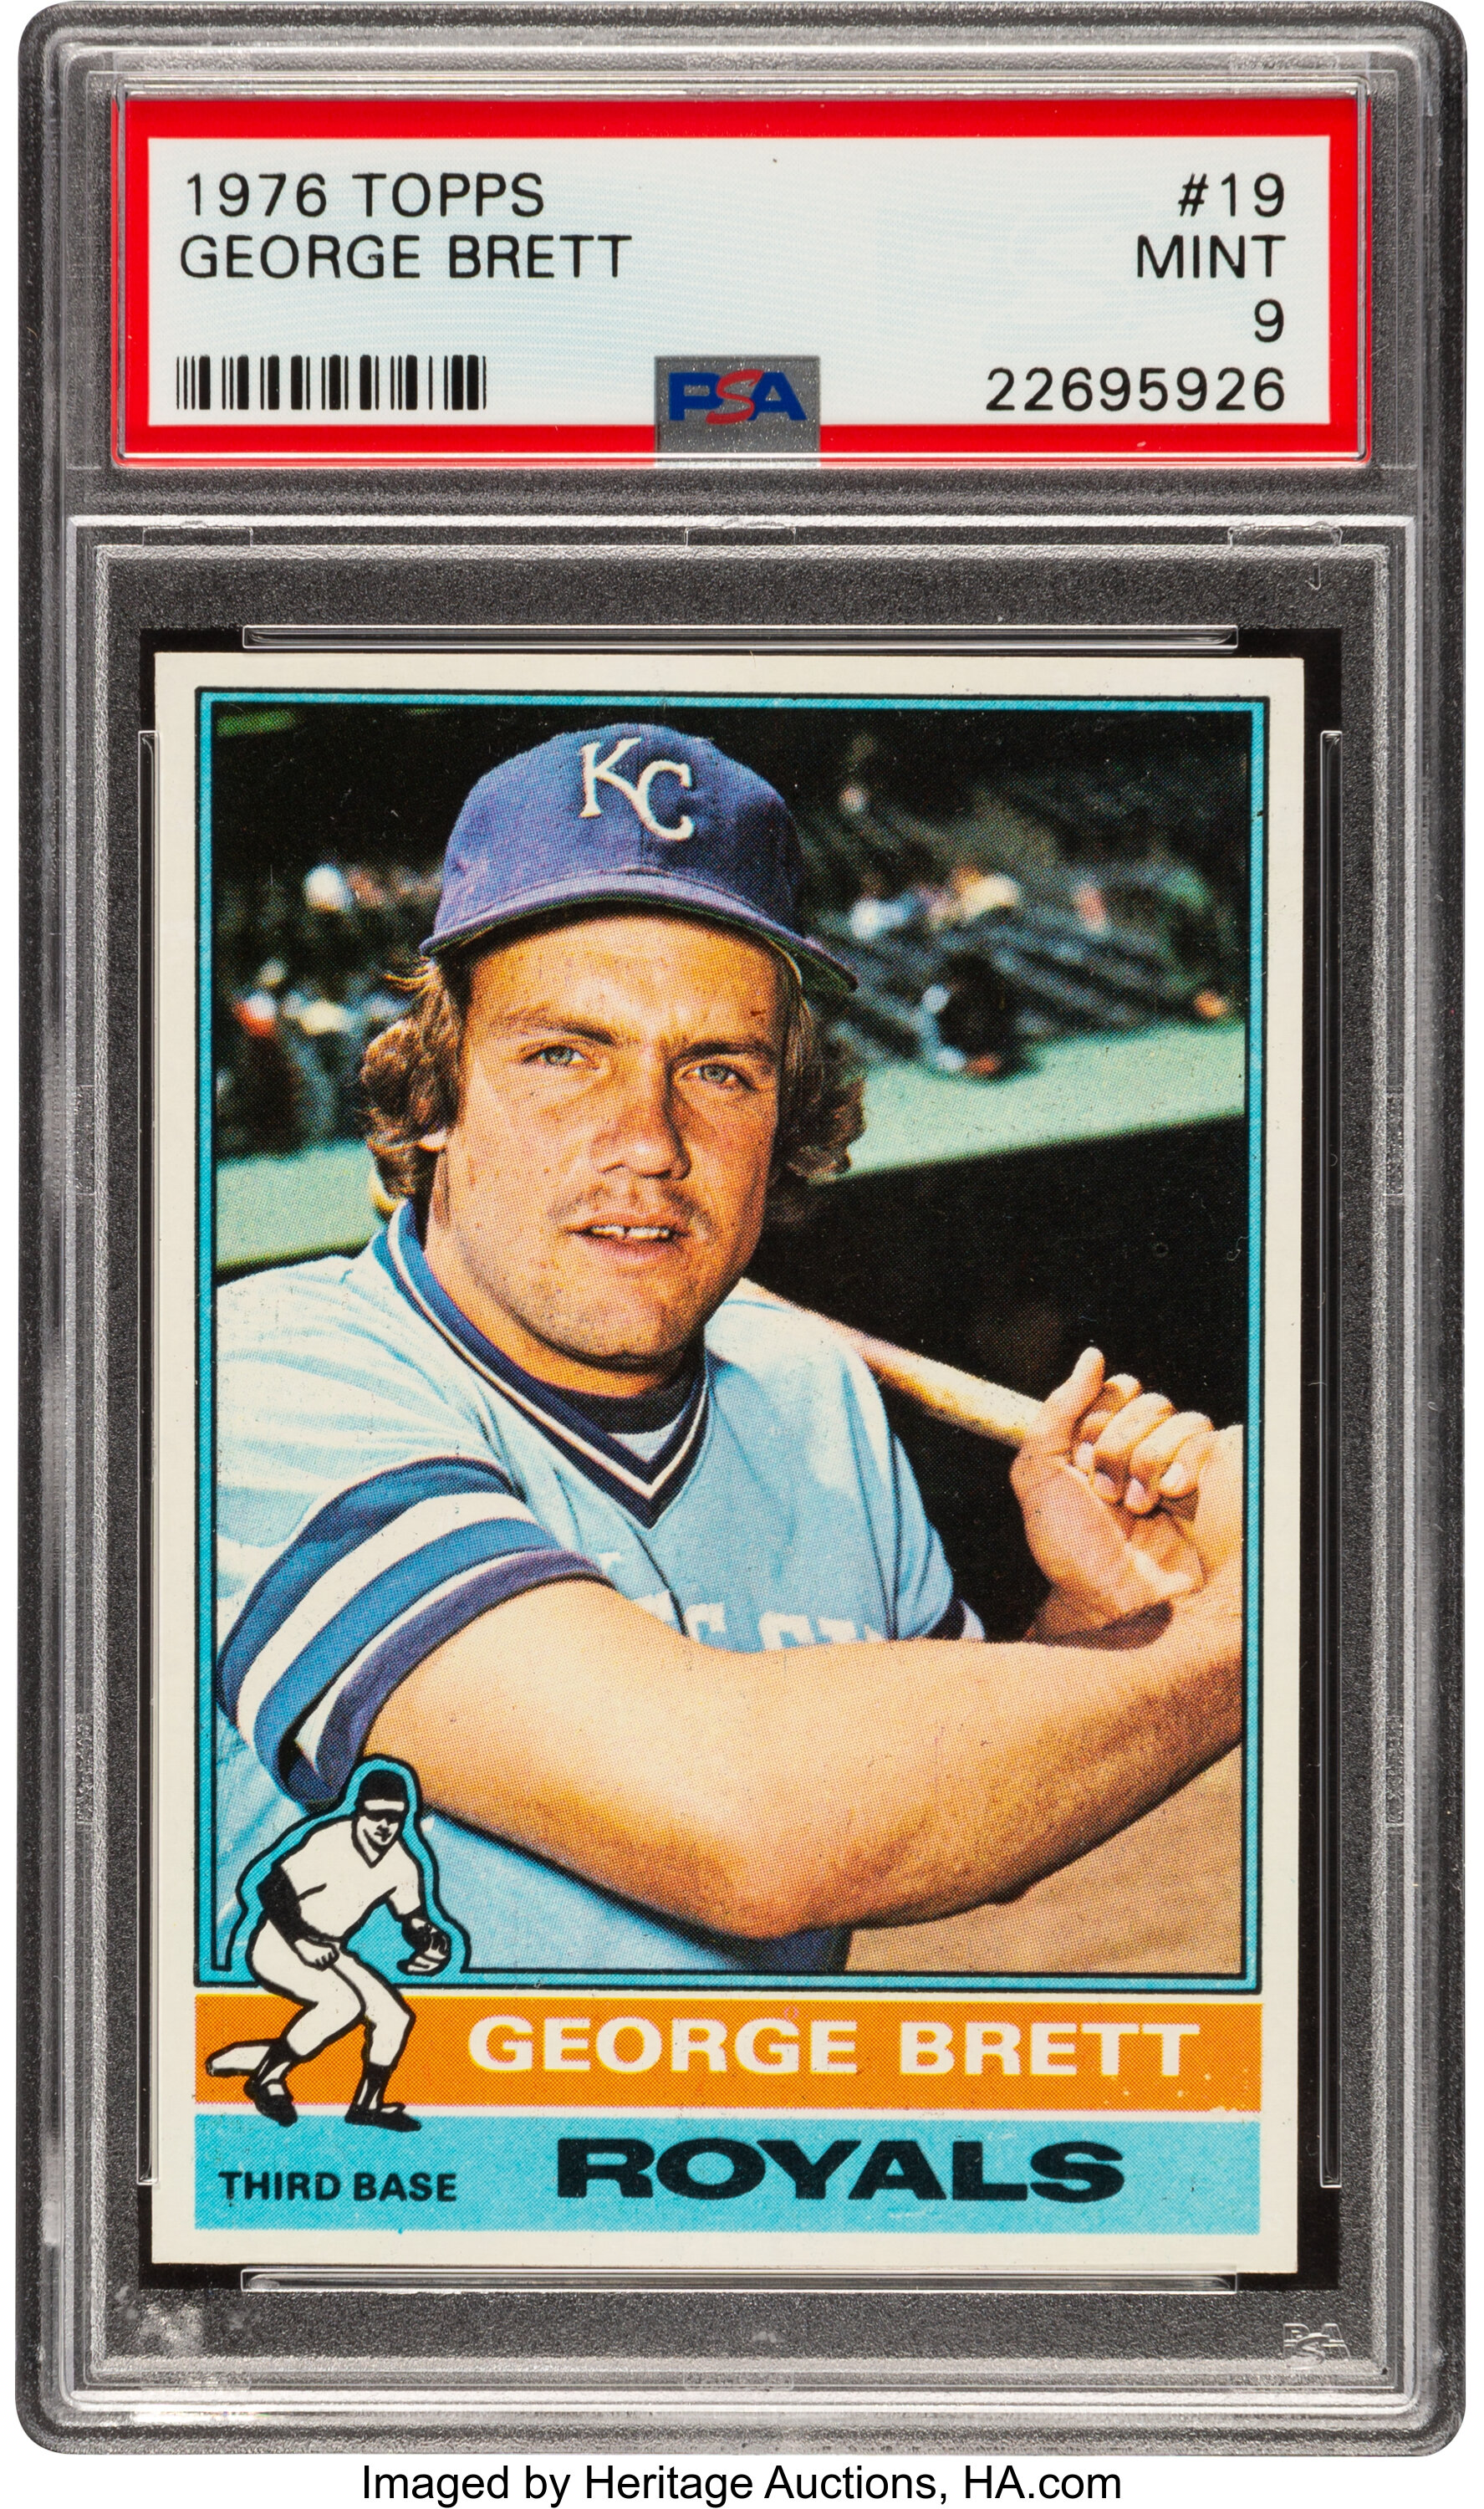 Sold at Auction: 1975 Topps George Brett Rookie Card - Low grade